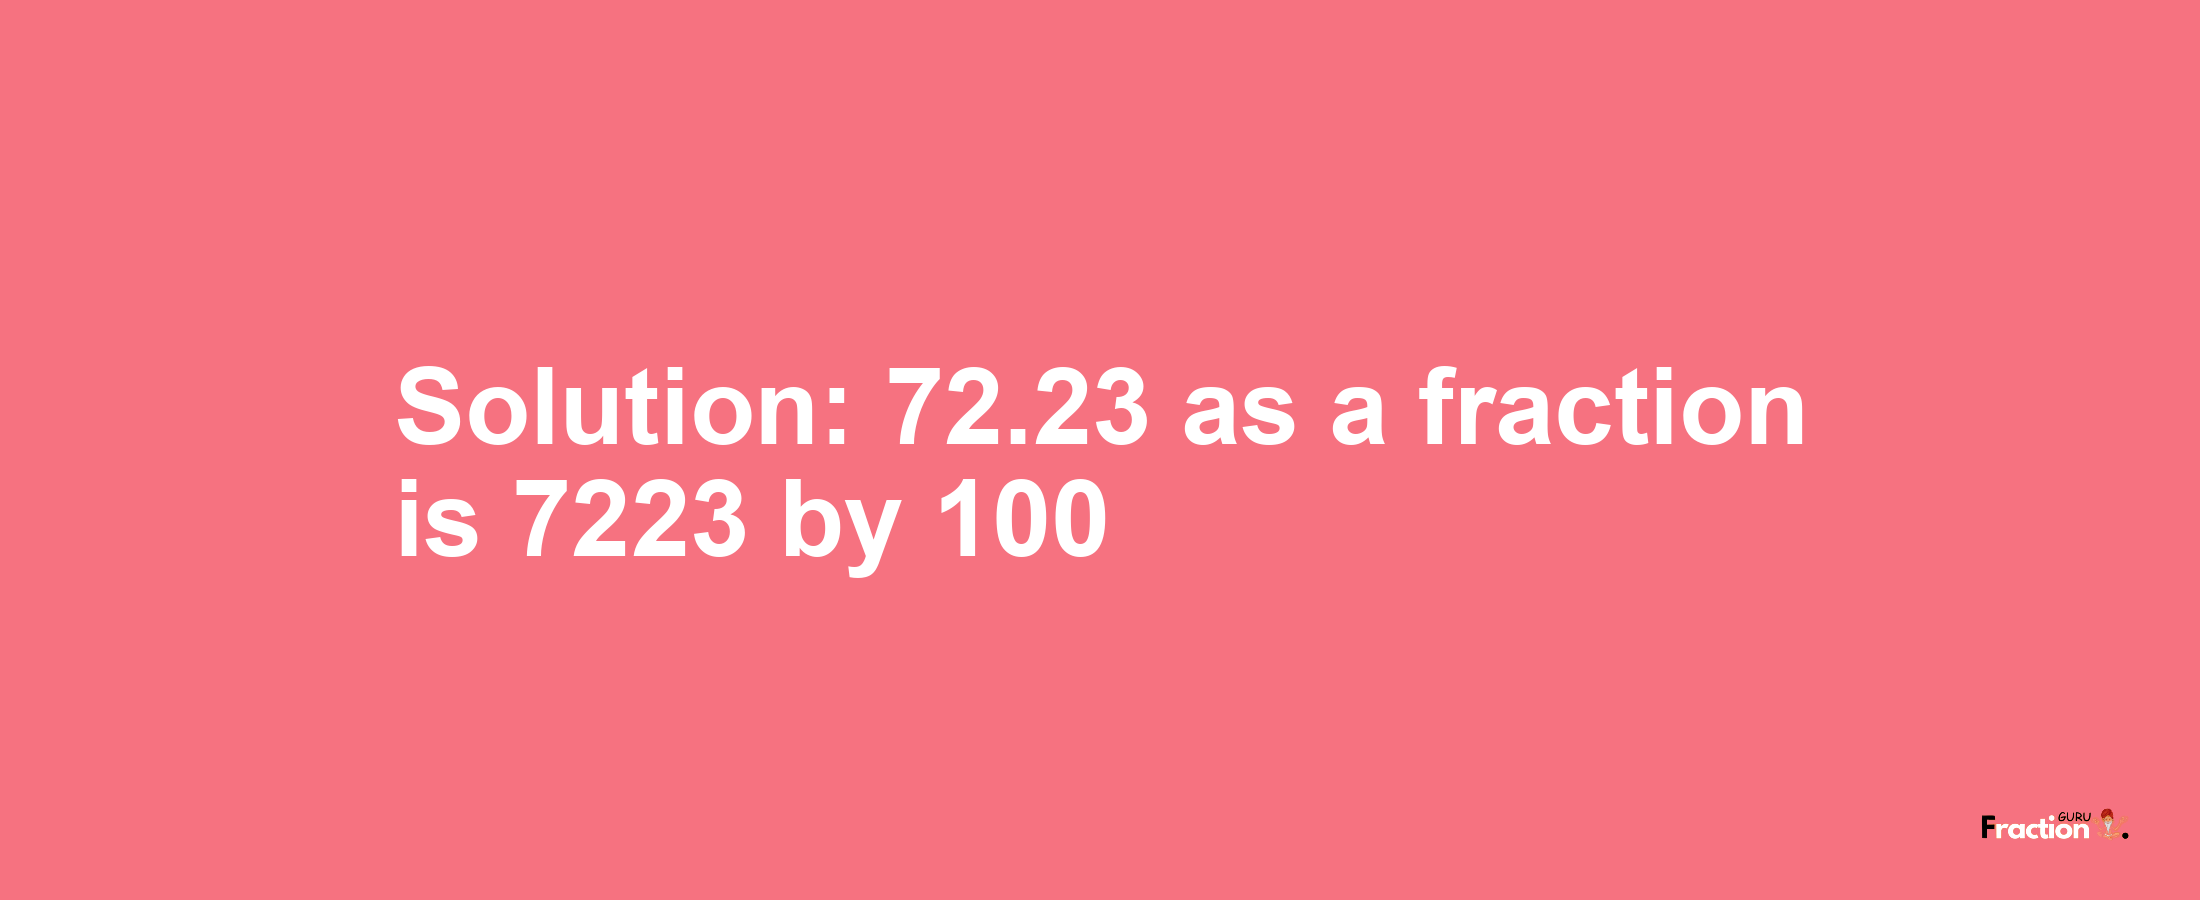 Solution:72.23 as a fraction is 7223/100